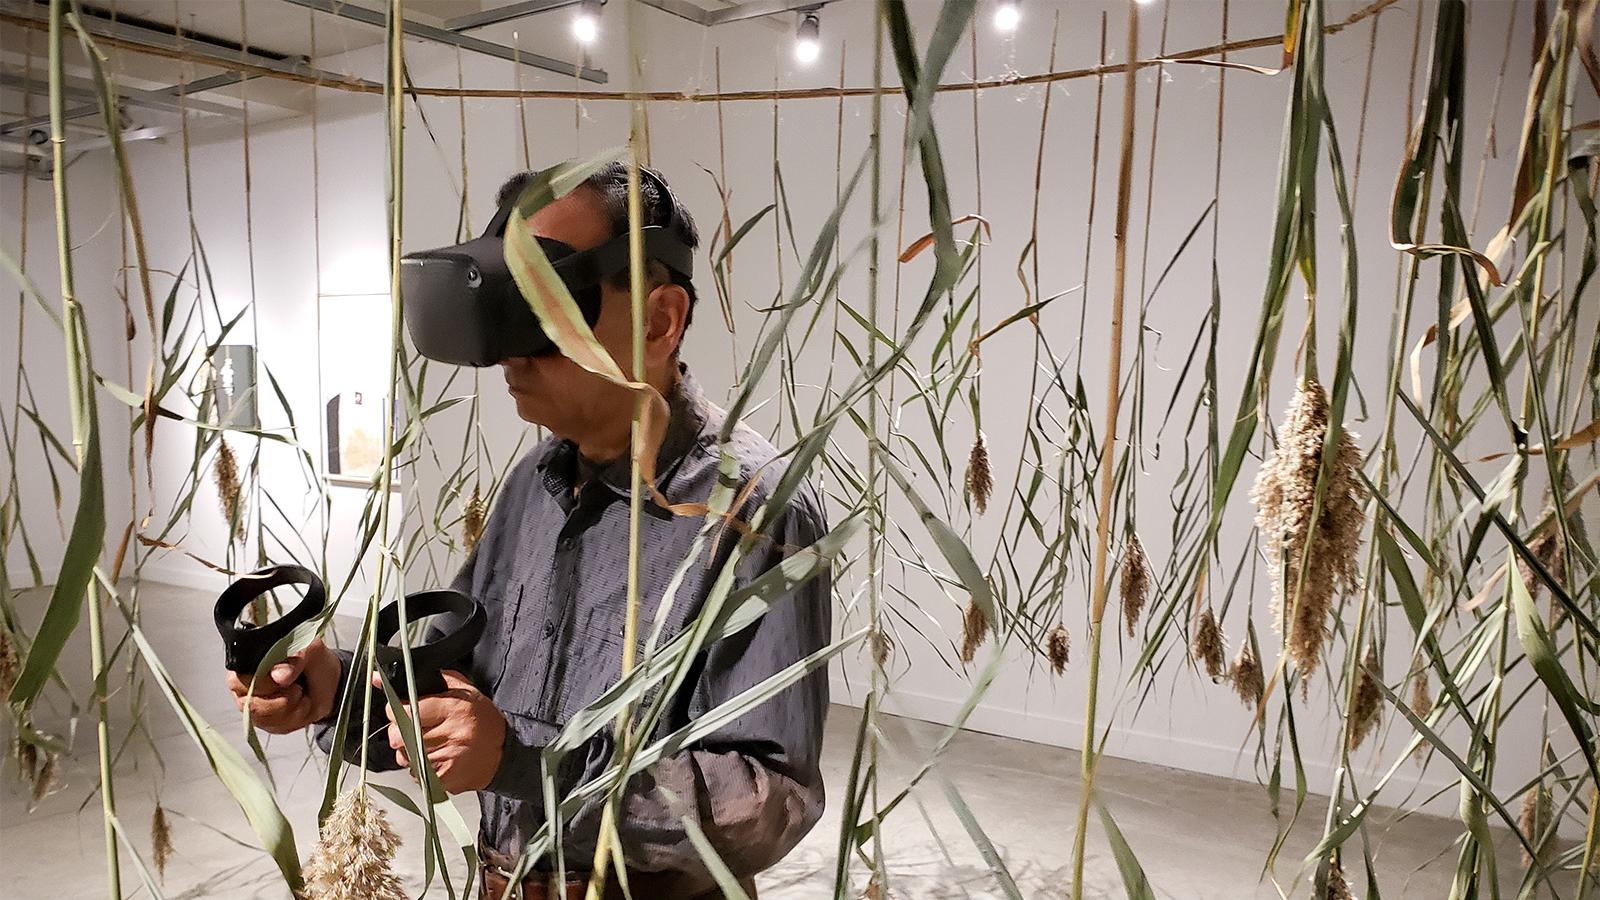 Installation with participant in virtual reality gear